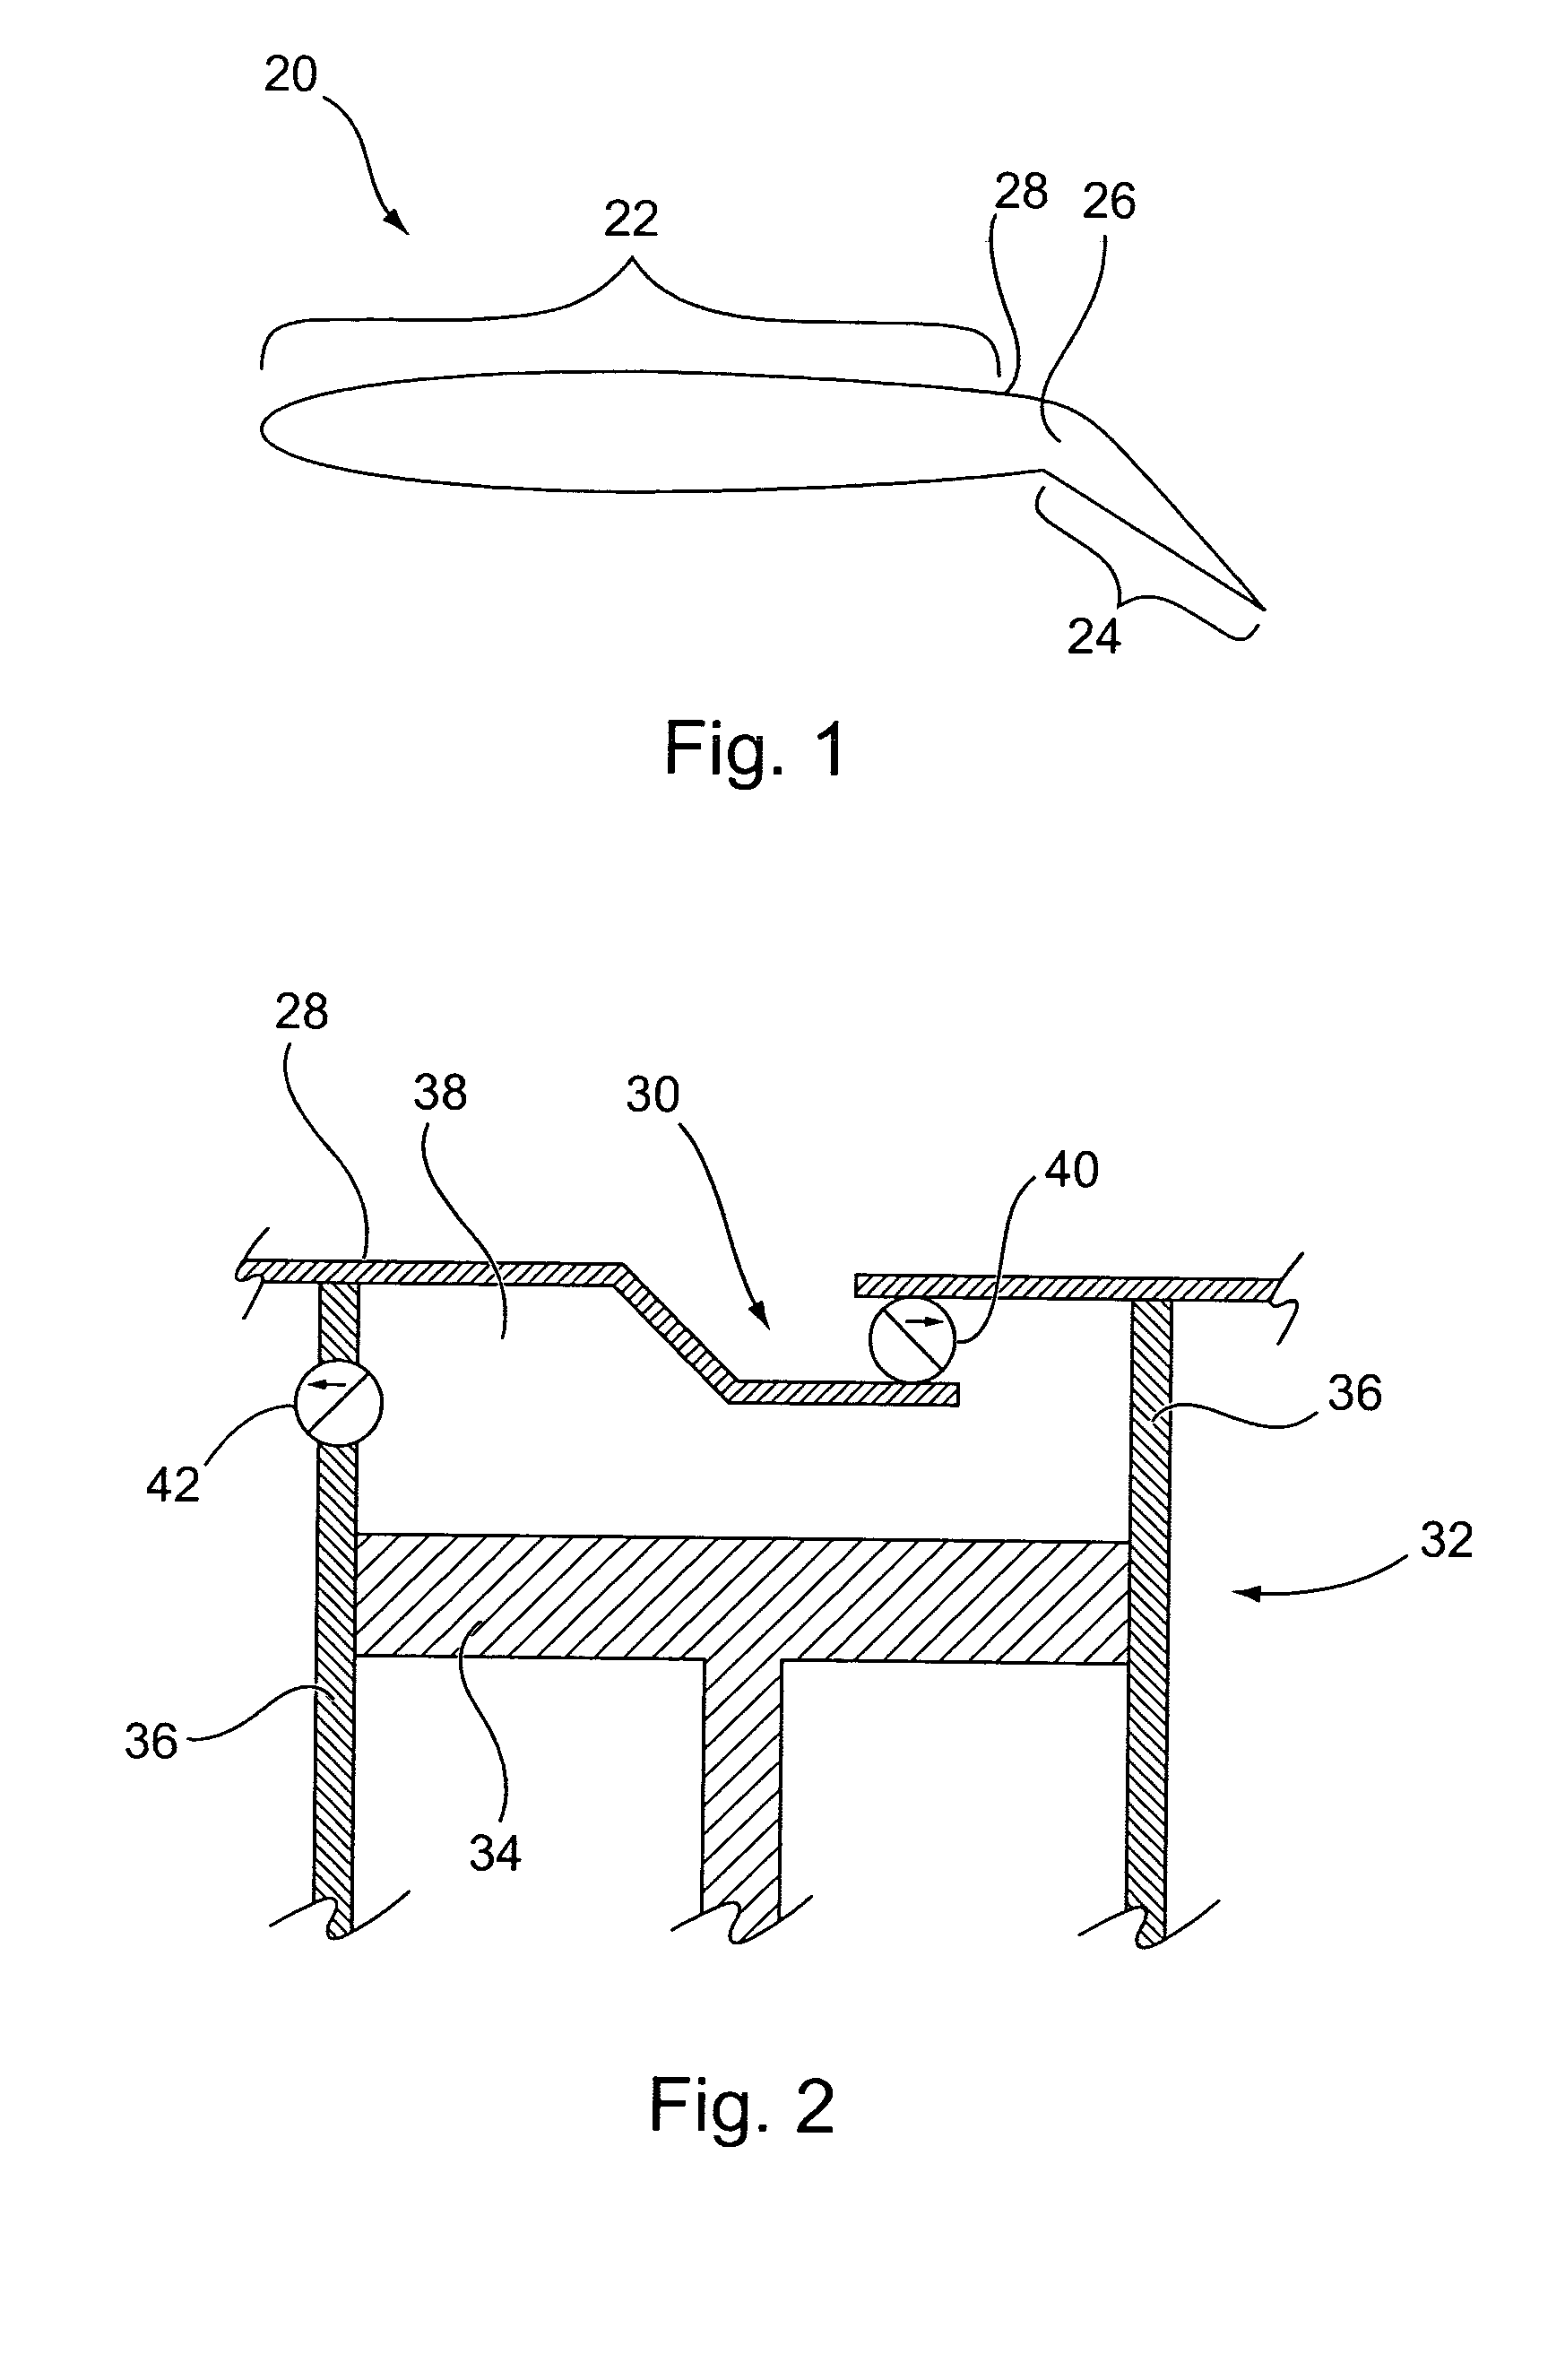 Method and device for altering the separation characteristics of air-flow over an aerodynamic surface via intermittent suction